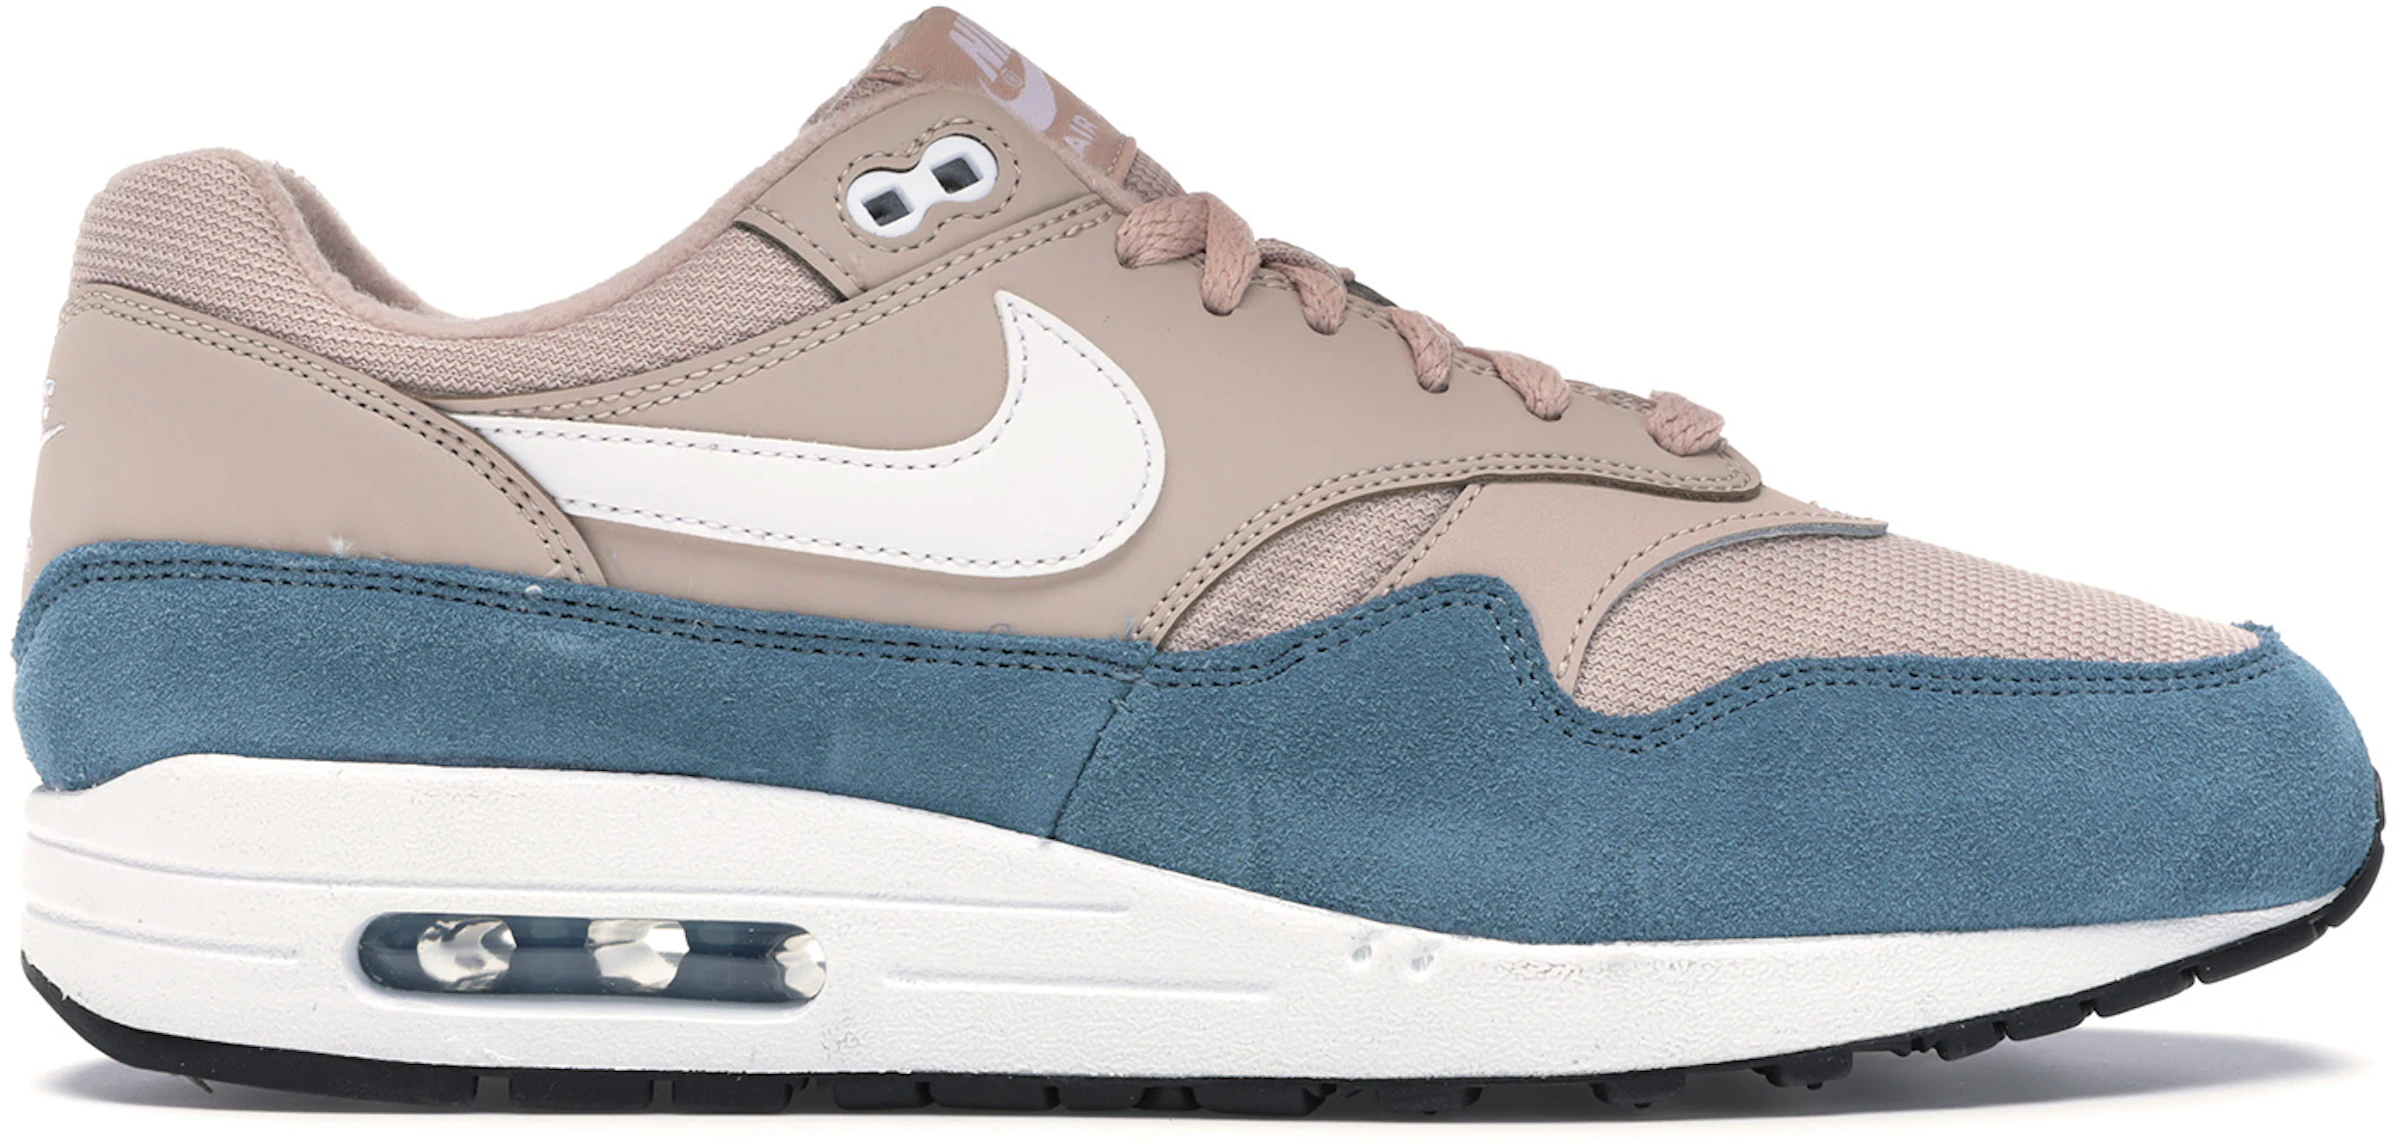 Nike Air Max 1 Celestial Teal Particle Beige (Women's) - US